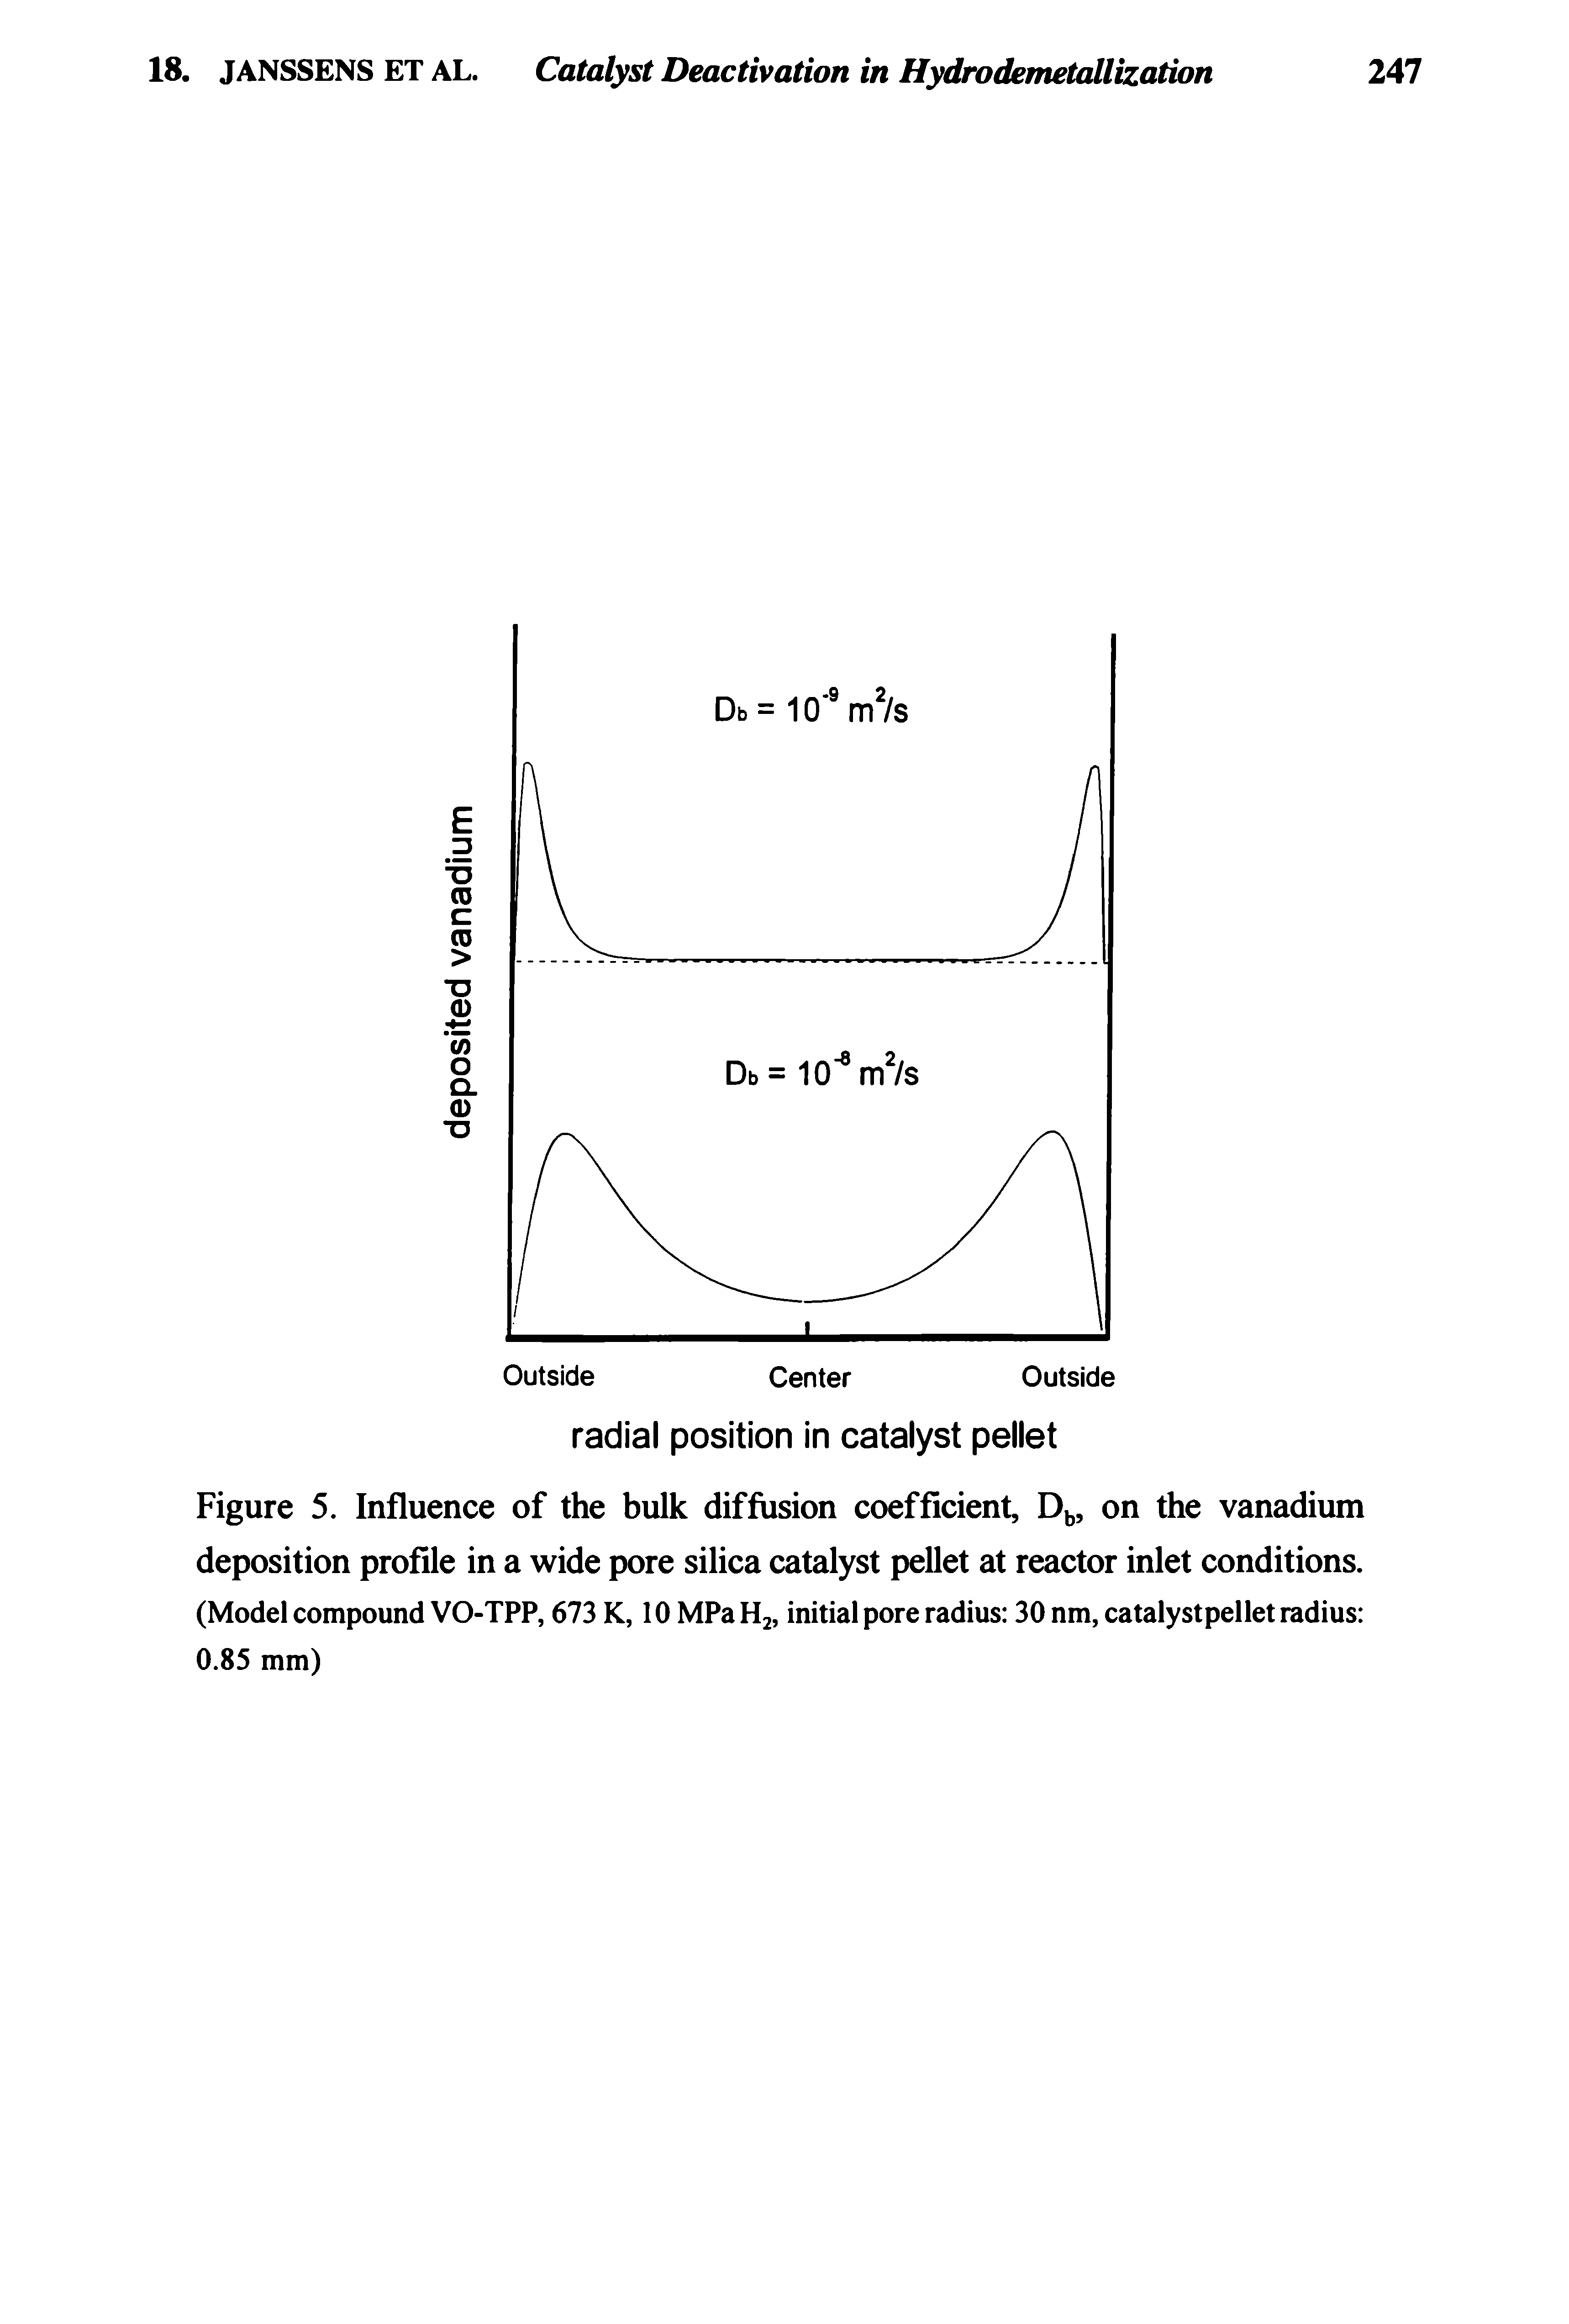 Figure 5. Influence of the bulk difftision coefficient, D, on the vanadium deposition profile in a wide pore silica catalyst pellet at reactor inlet conditions. (Model compound VO-TPP, 673 K, 10 MPa H2, initial pore radius 30 nm, catalystpellet radius 0.85 mm)...